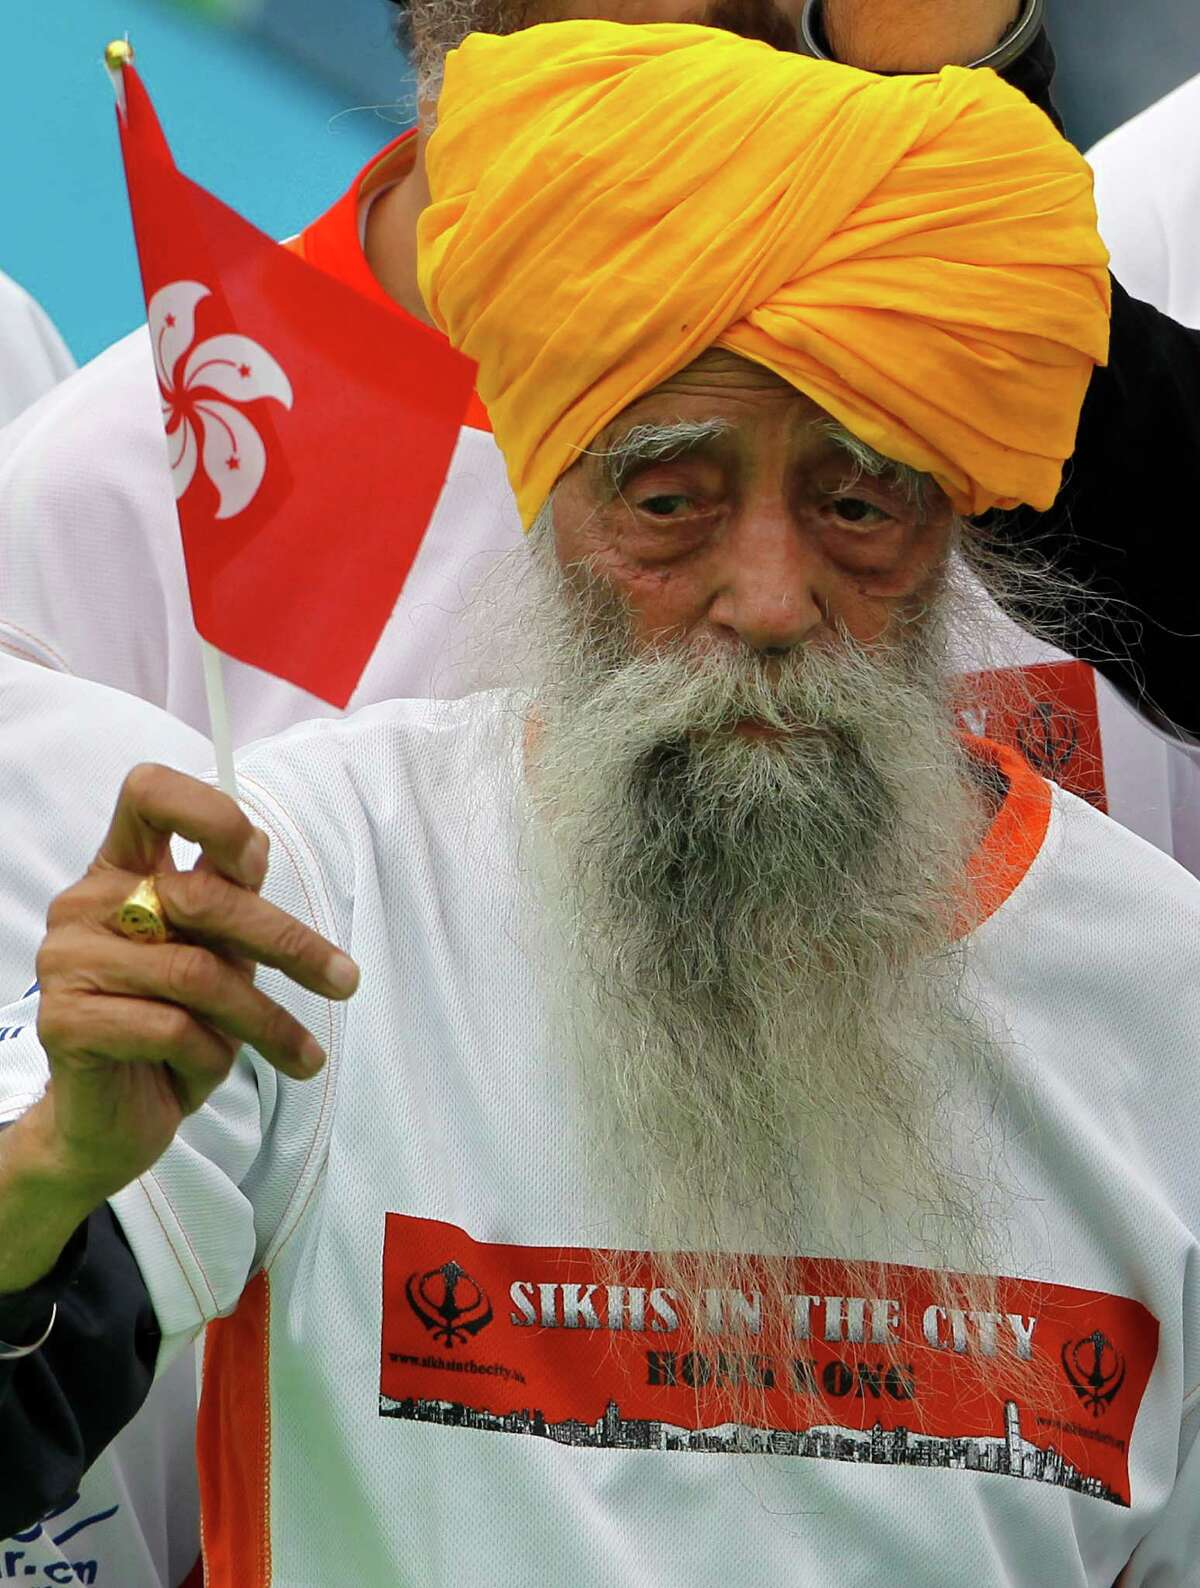 Centenarian marathon runner Fauja Singh, 101, center, originally from Beas Pind, in Jalandhar, India but who now lives in London, raises a Hong Kong flag after finishing a 10-kilometer race, which was part of the annual Hong Kong Marathon, in Hong Kong Sunday, Feb. 24, 2013. Singh will retire from public racing after competing in the marathon.